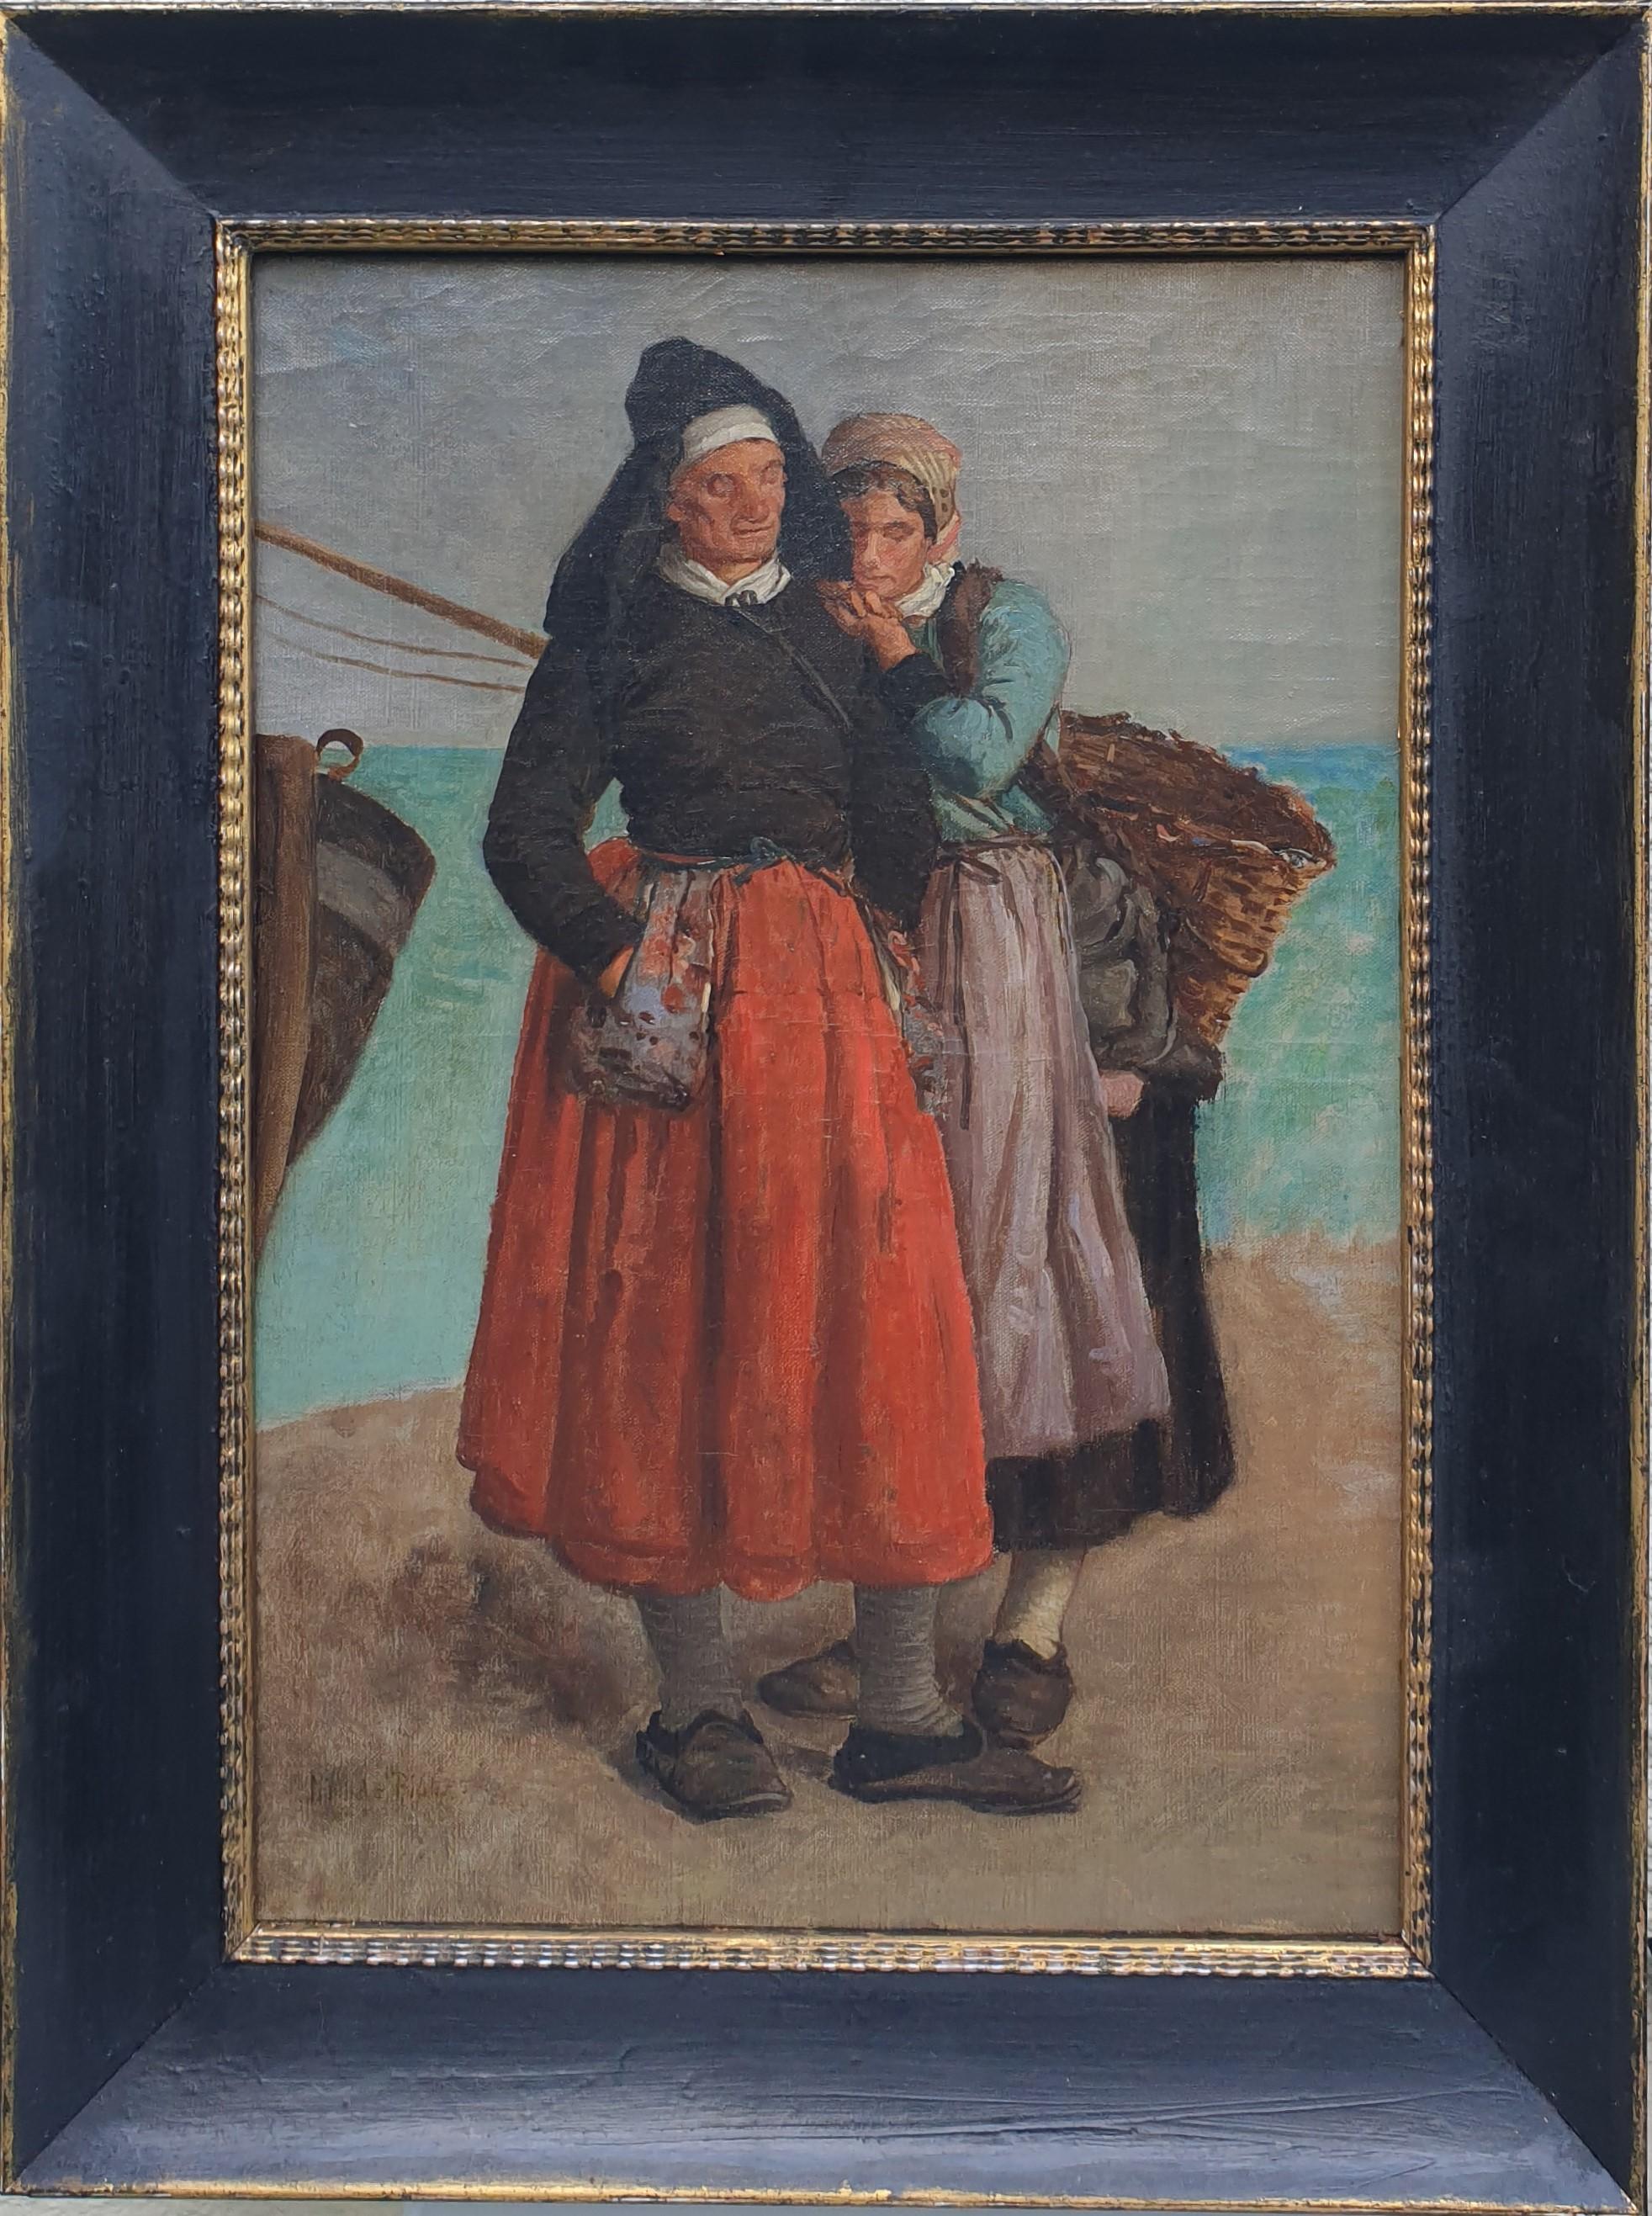 Realist french painting Fishermen wifes BILLET portrait costumes 19th  - Painting by Pierre Billet